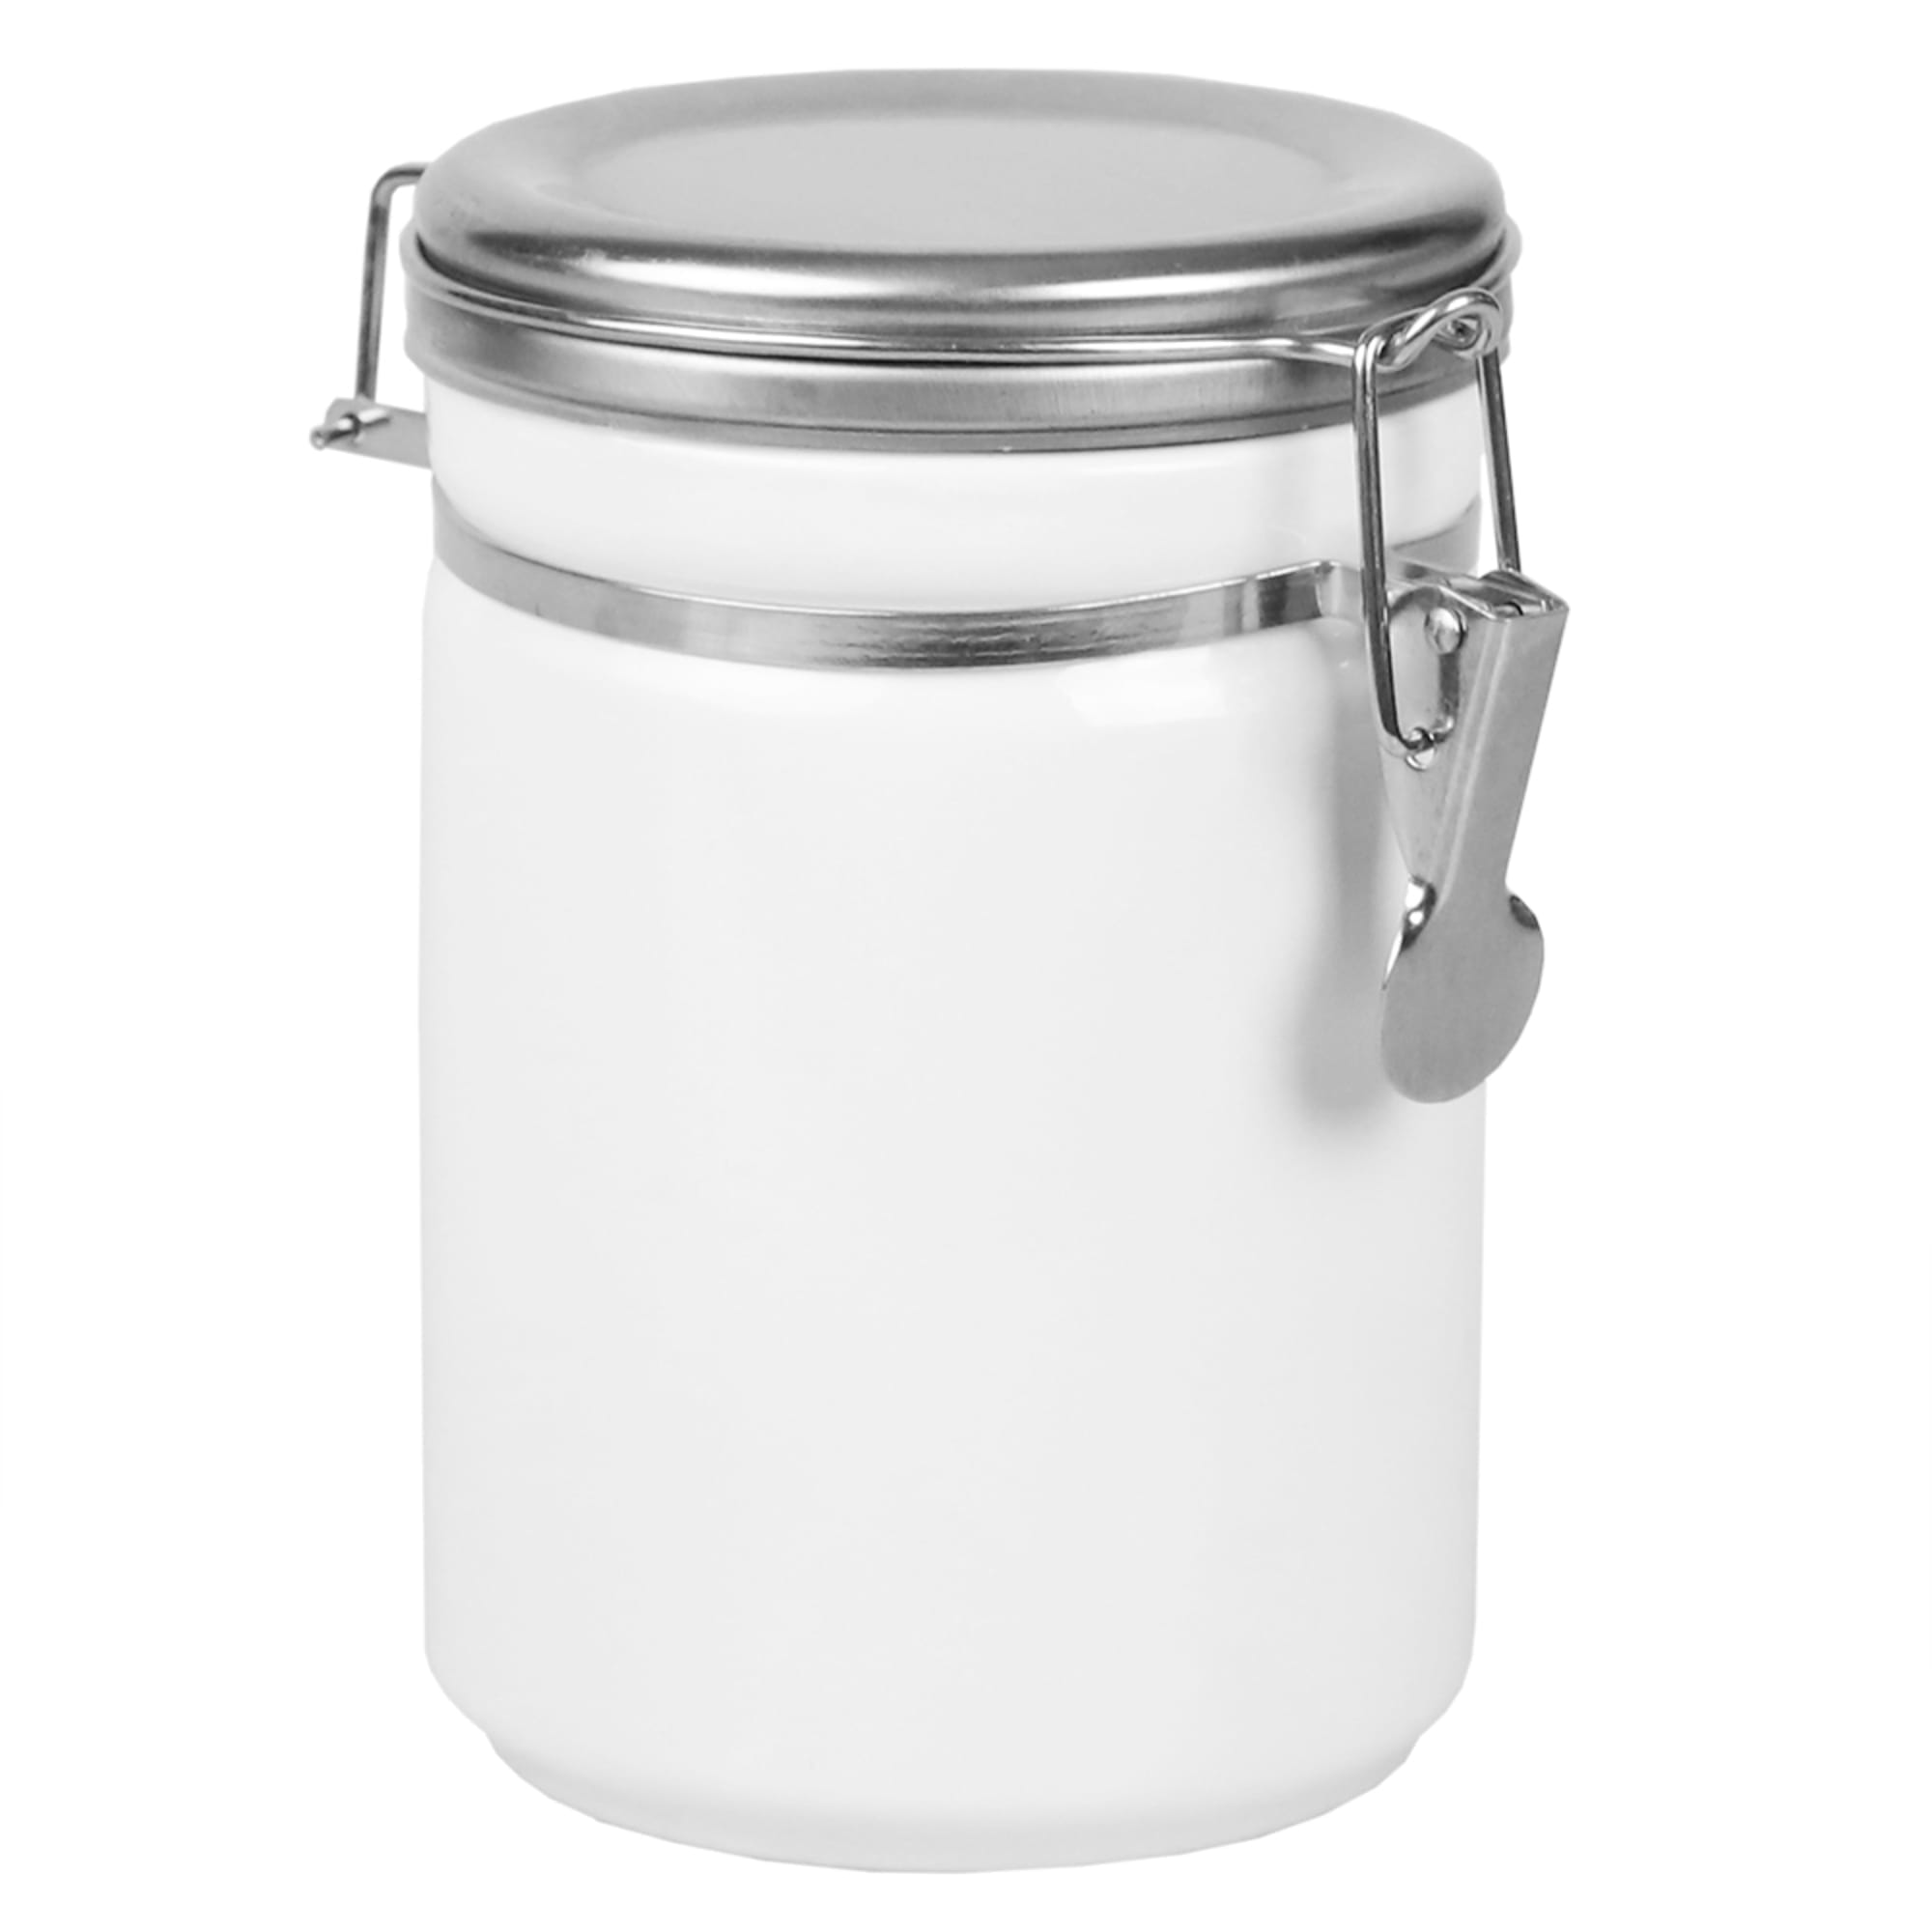 Home Basics 40 oz. Canister with Stainless Steel Top, White $7 EACH, CASE PACK OF 8